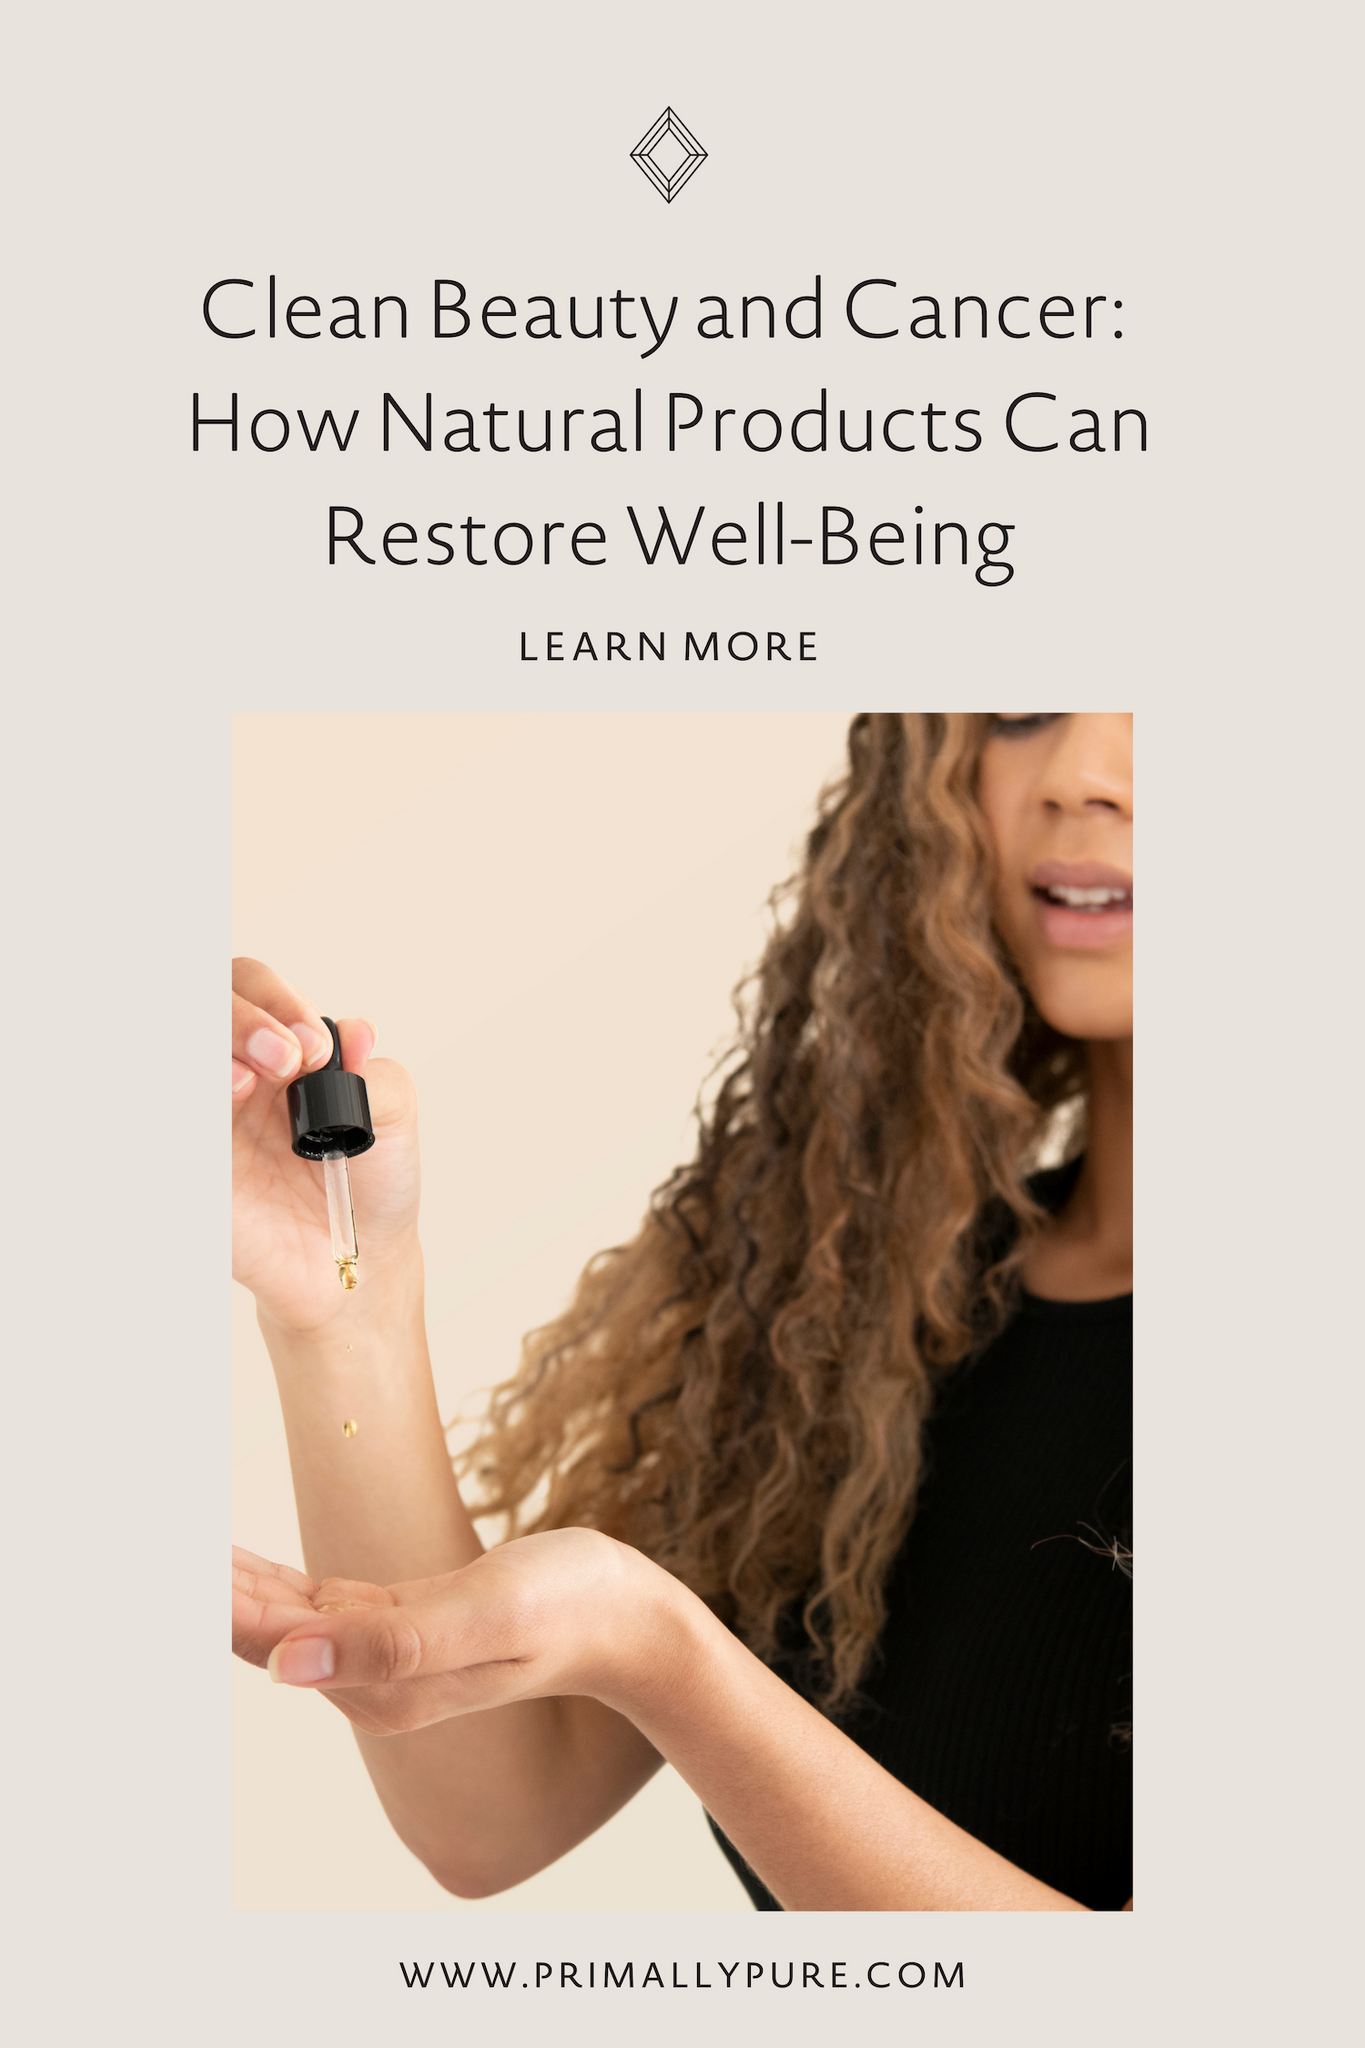 Clean Beauty and Cancer: How Natural Products Can Restore Well-Being | Primally Pure Skincare